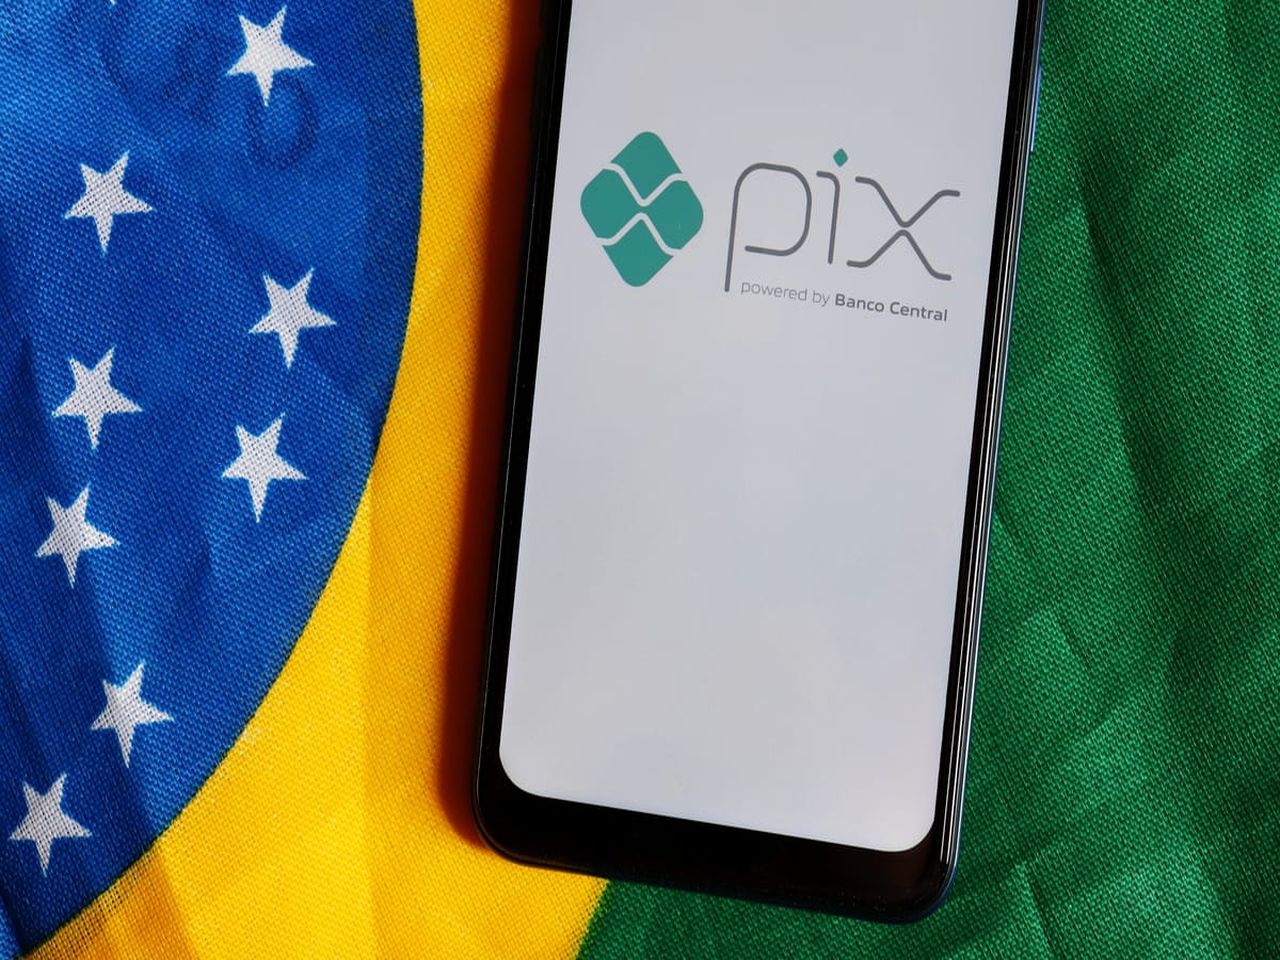 Brazil's Central Bank Promotes Pix for Cross-Border Payments